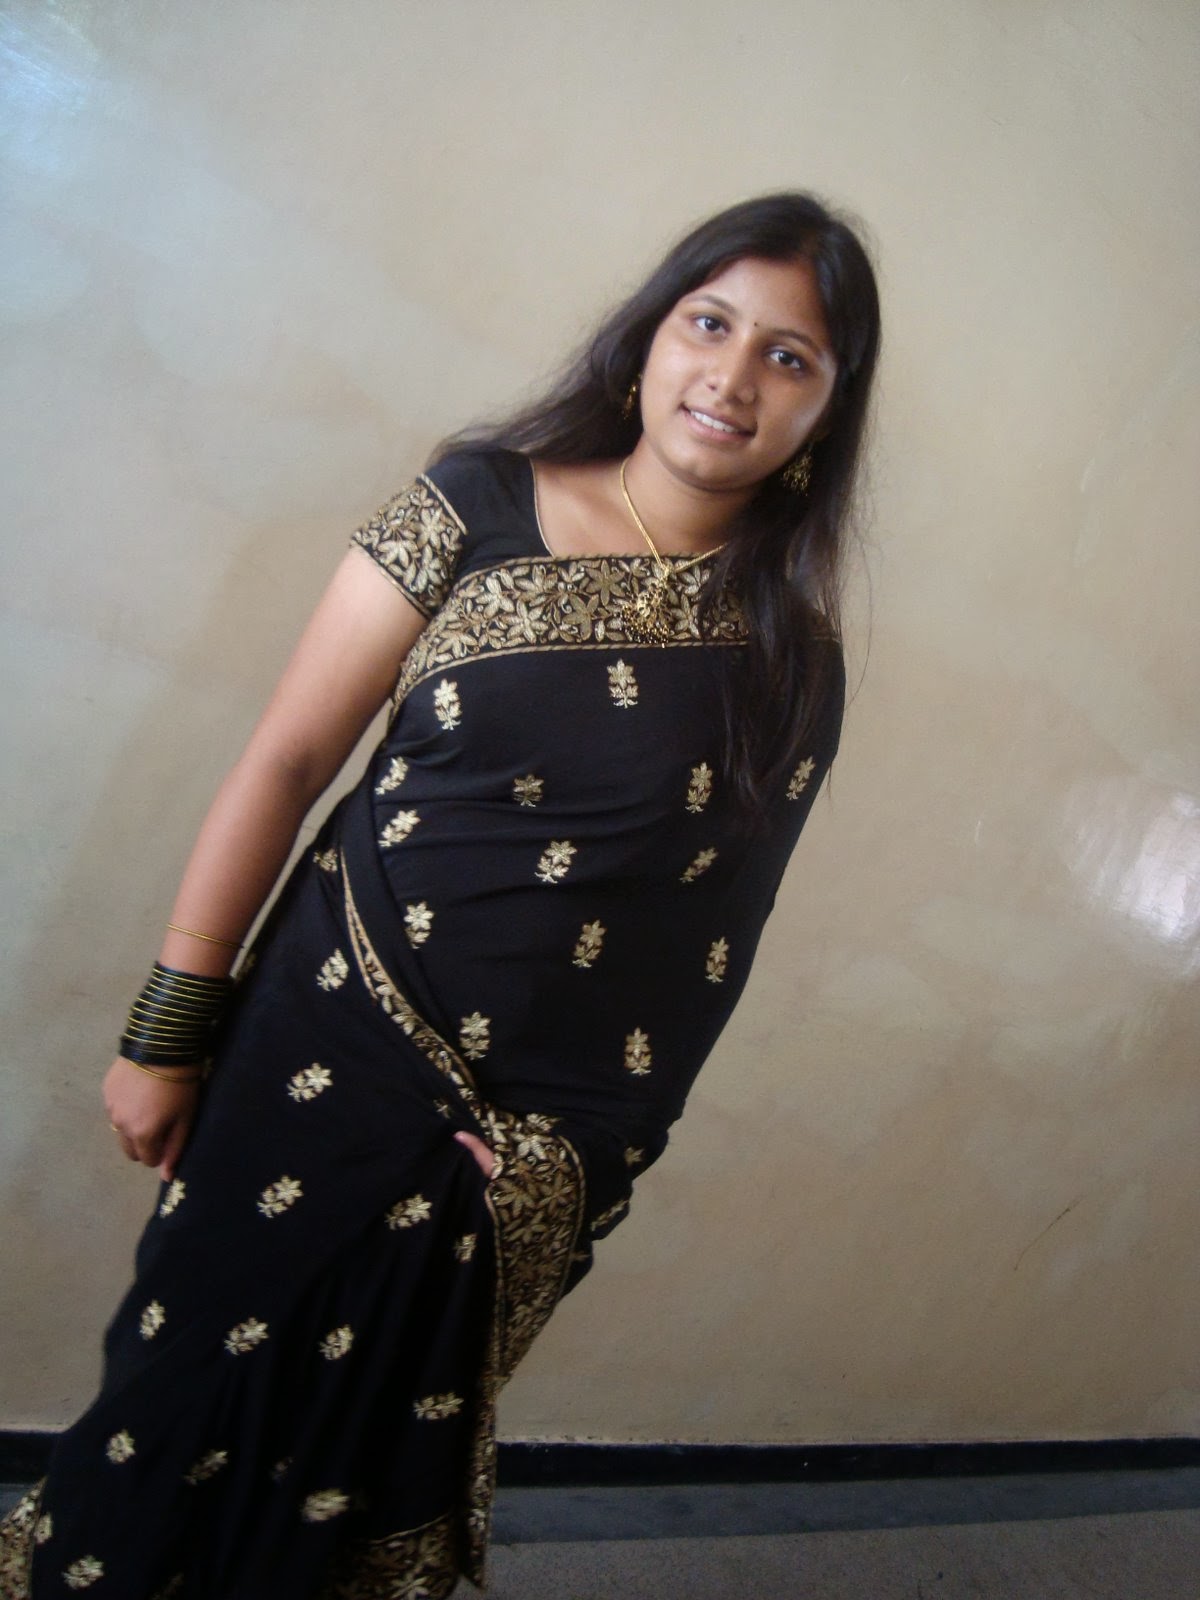 31 Indian Housewifes And Girls In Saree Pictures Gallery -6759